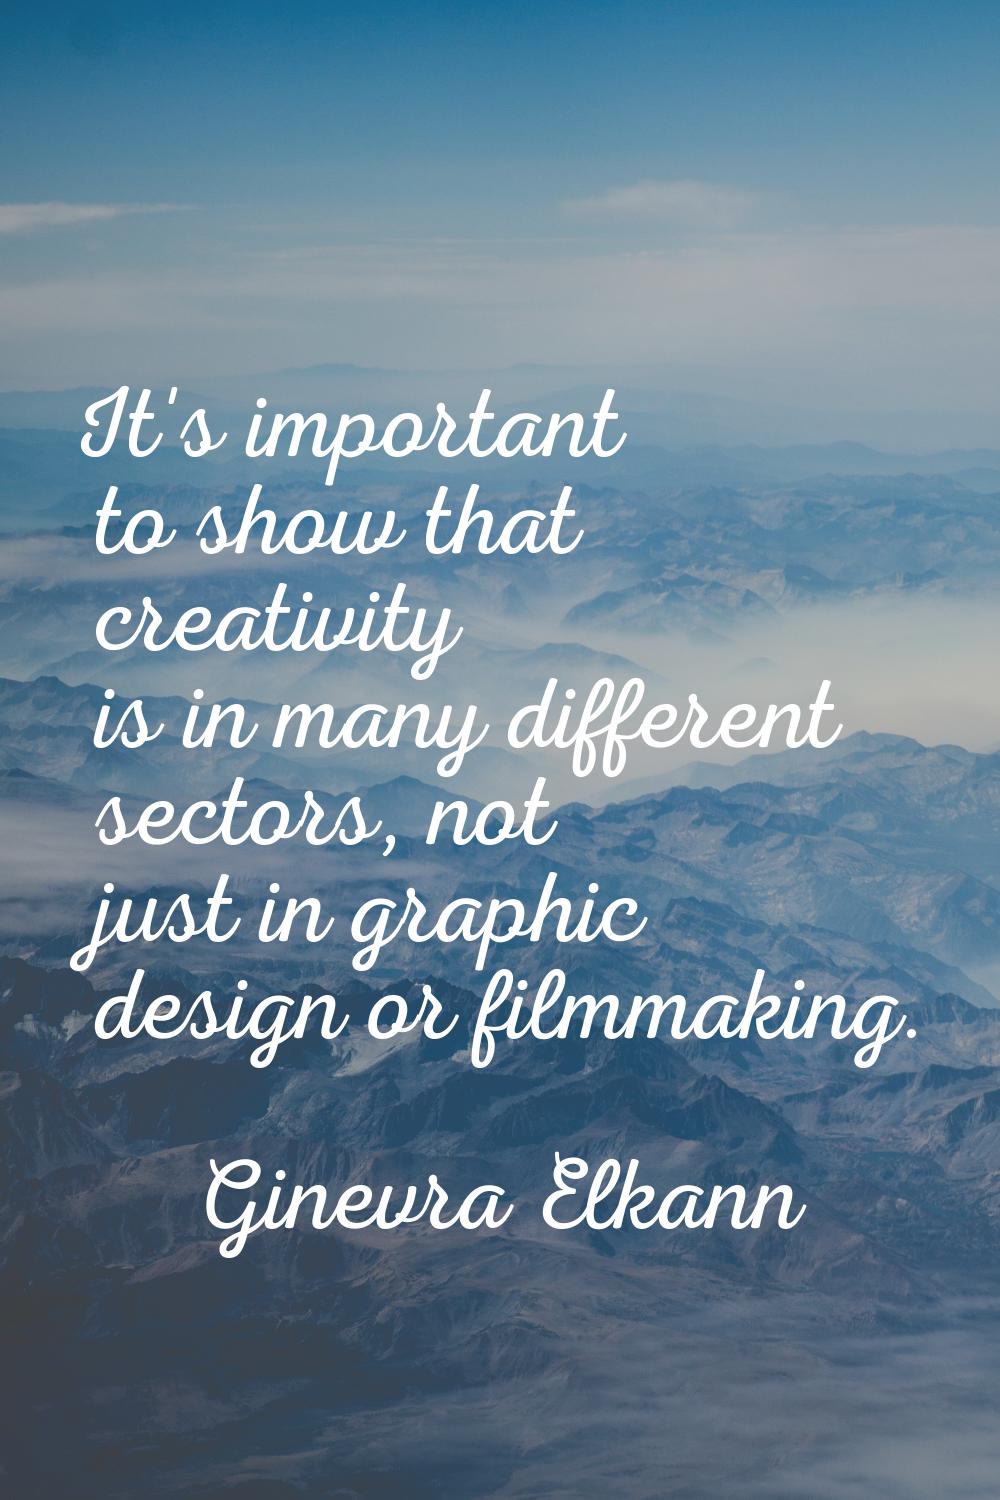 It's important to show that creativity is in many different sectors, not just in graphic design or 